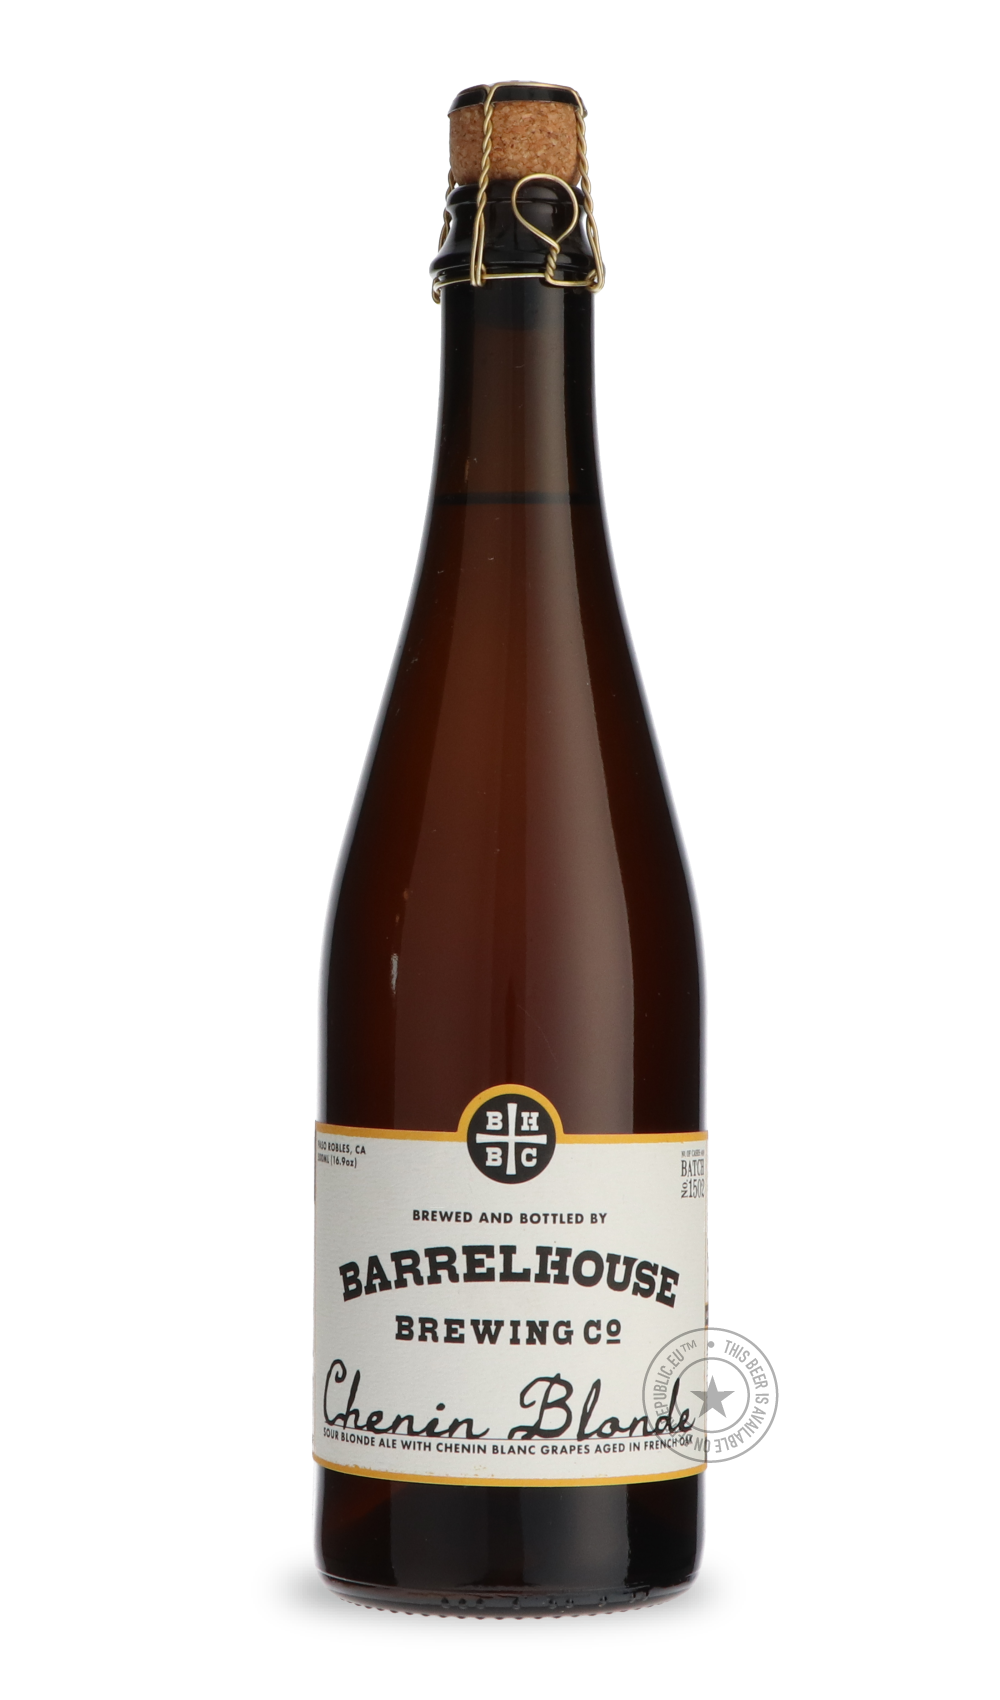 -BarrelHouse- Chenin Blonde-Sour / Wild & Fruity- Only @ Beer Republic - The best online beer store for American & Canadian craft beer - Buy beer online from the USA and Canada - Bier online kopen - Amerikaans bier kopen - Craft beer store - Craft beer kopen - Amerikanisch bier kaufen - Bier online kaufen - Acheter biere online - IPA - Stout - Porter - New England IPA - Hazy IPA - Imperial Stout - Barrel Aged - Barrel Aged Imperial Stout - Brown - Dark beer - Blond - Blonde - Pilsner - Lager - Wheat - Weize